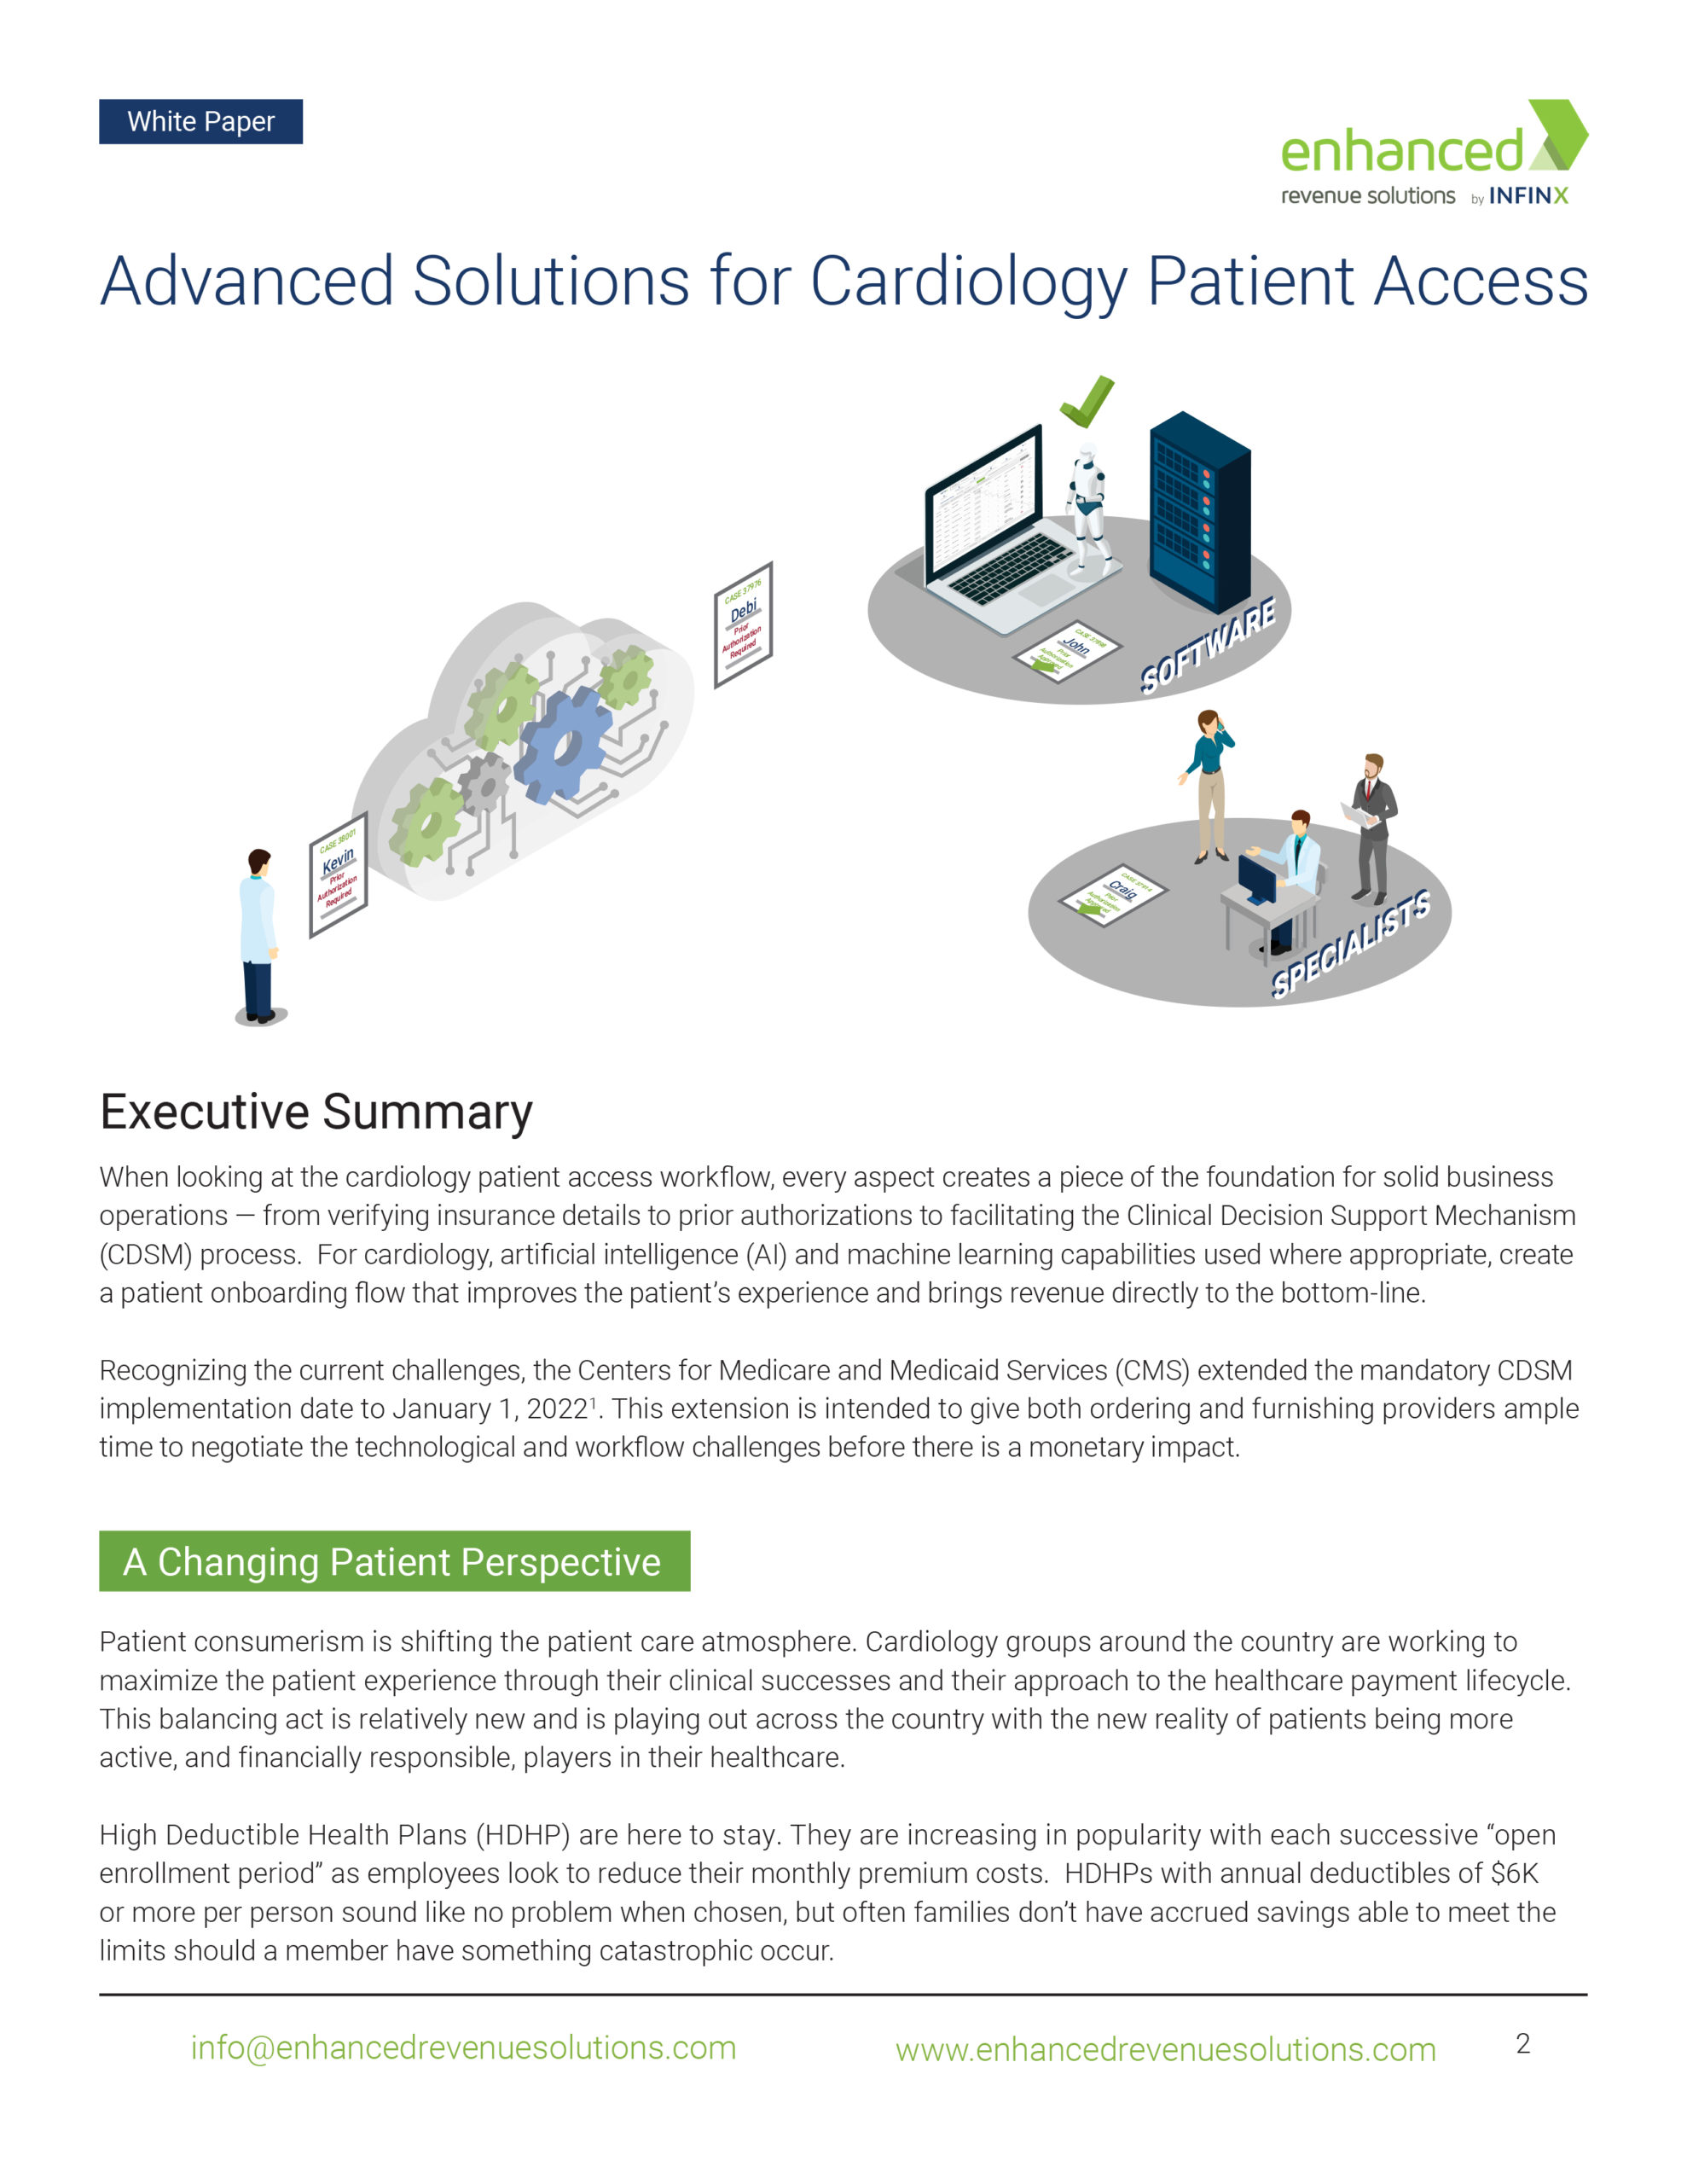 ERS by Infinx - White Paper-Advanced Solutions for Cardiology Patient Access - 2